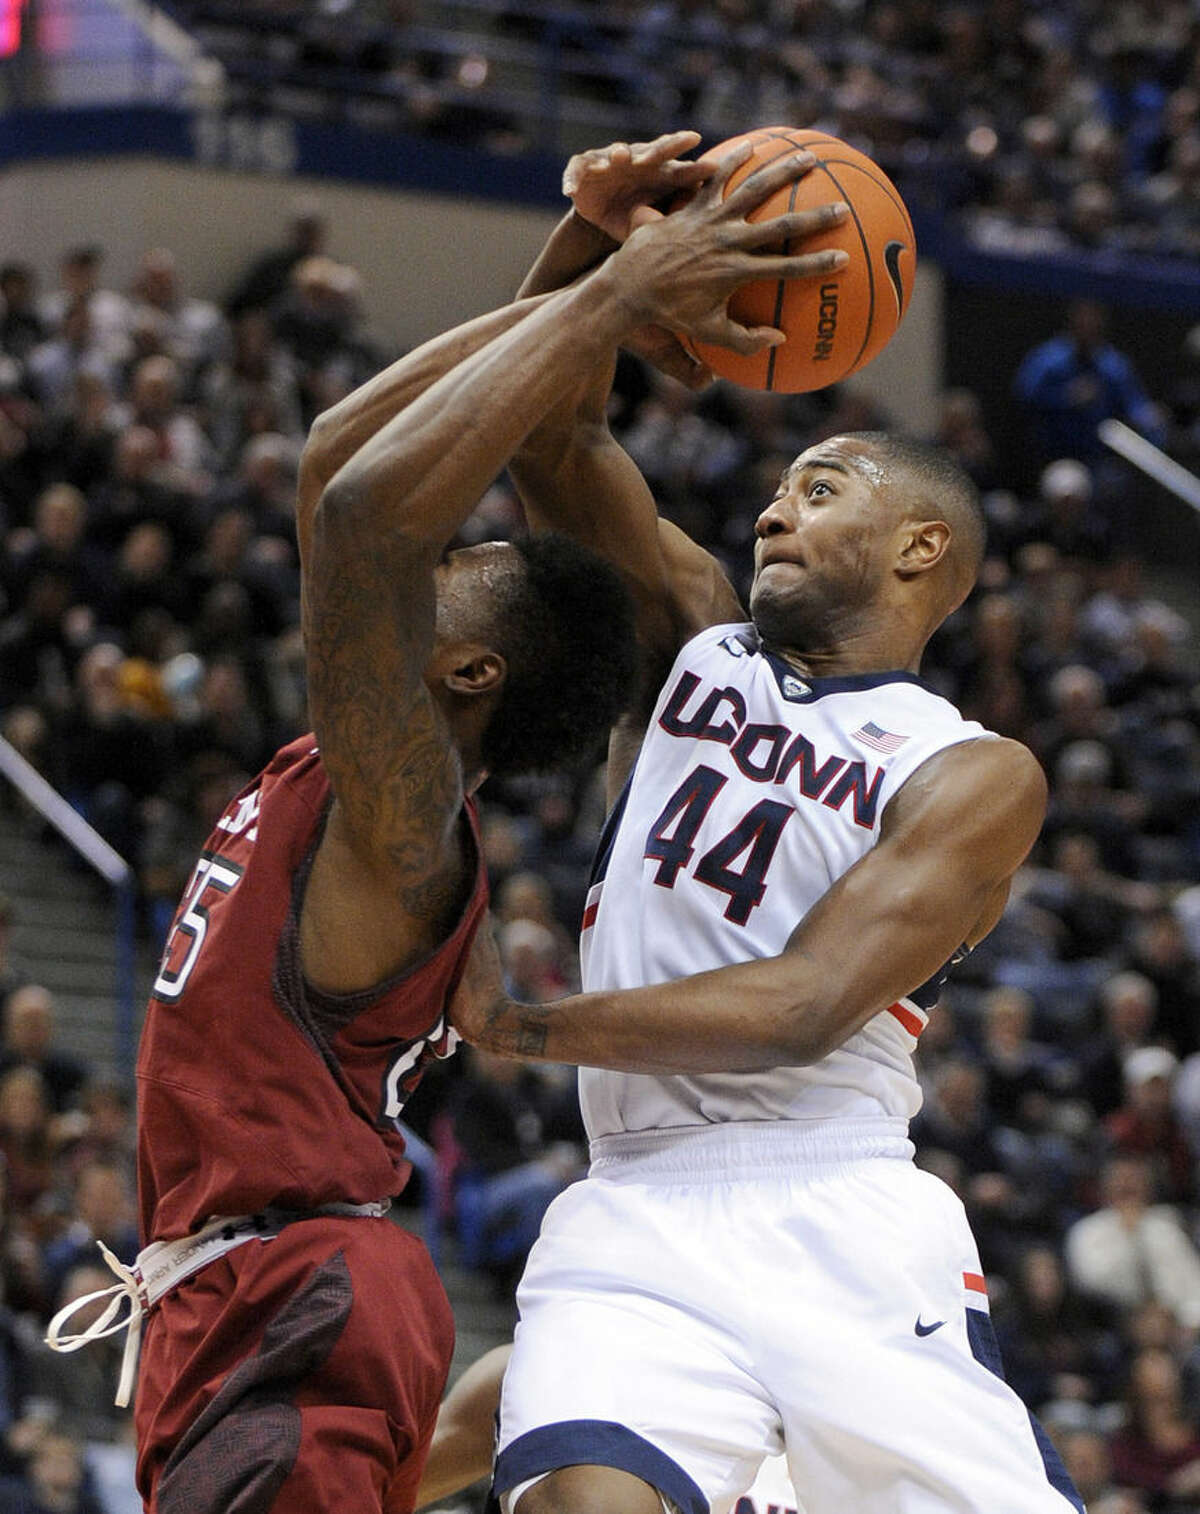 Connecticut's Rodney Purvis (44) fouls Temple's Quenton DeCosey (25) during the first half of an NCAA college basketball game in Hartford, Conn., on Wednesday, Dec. 31, 2014. (AP Photo/Fred Beckham)